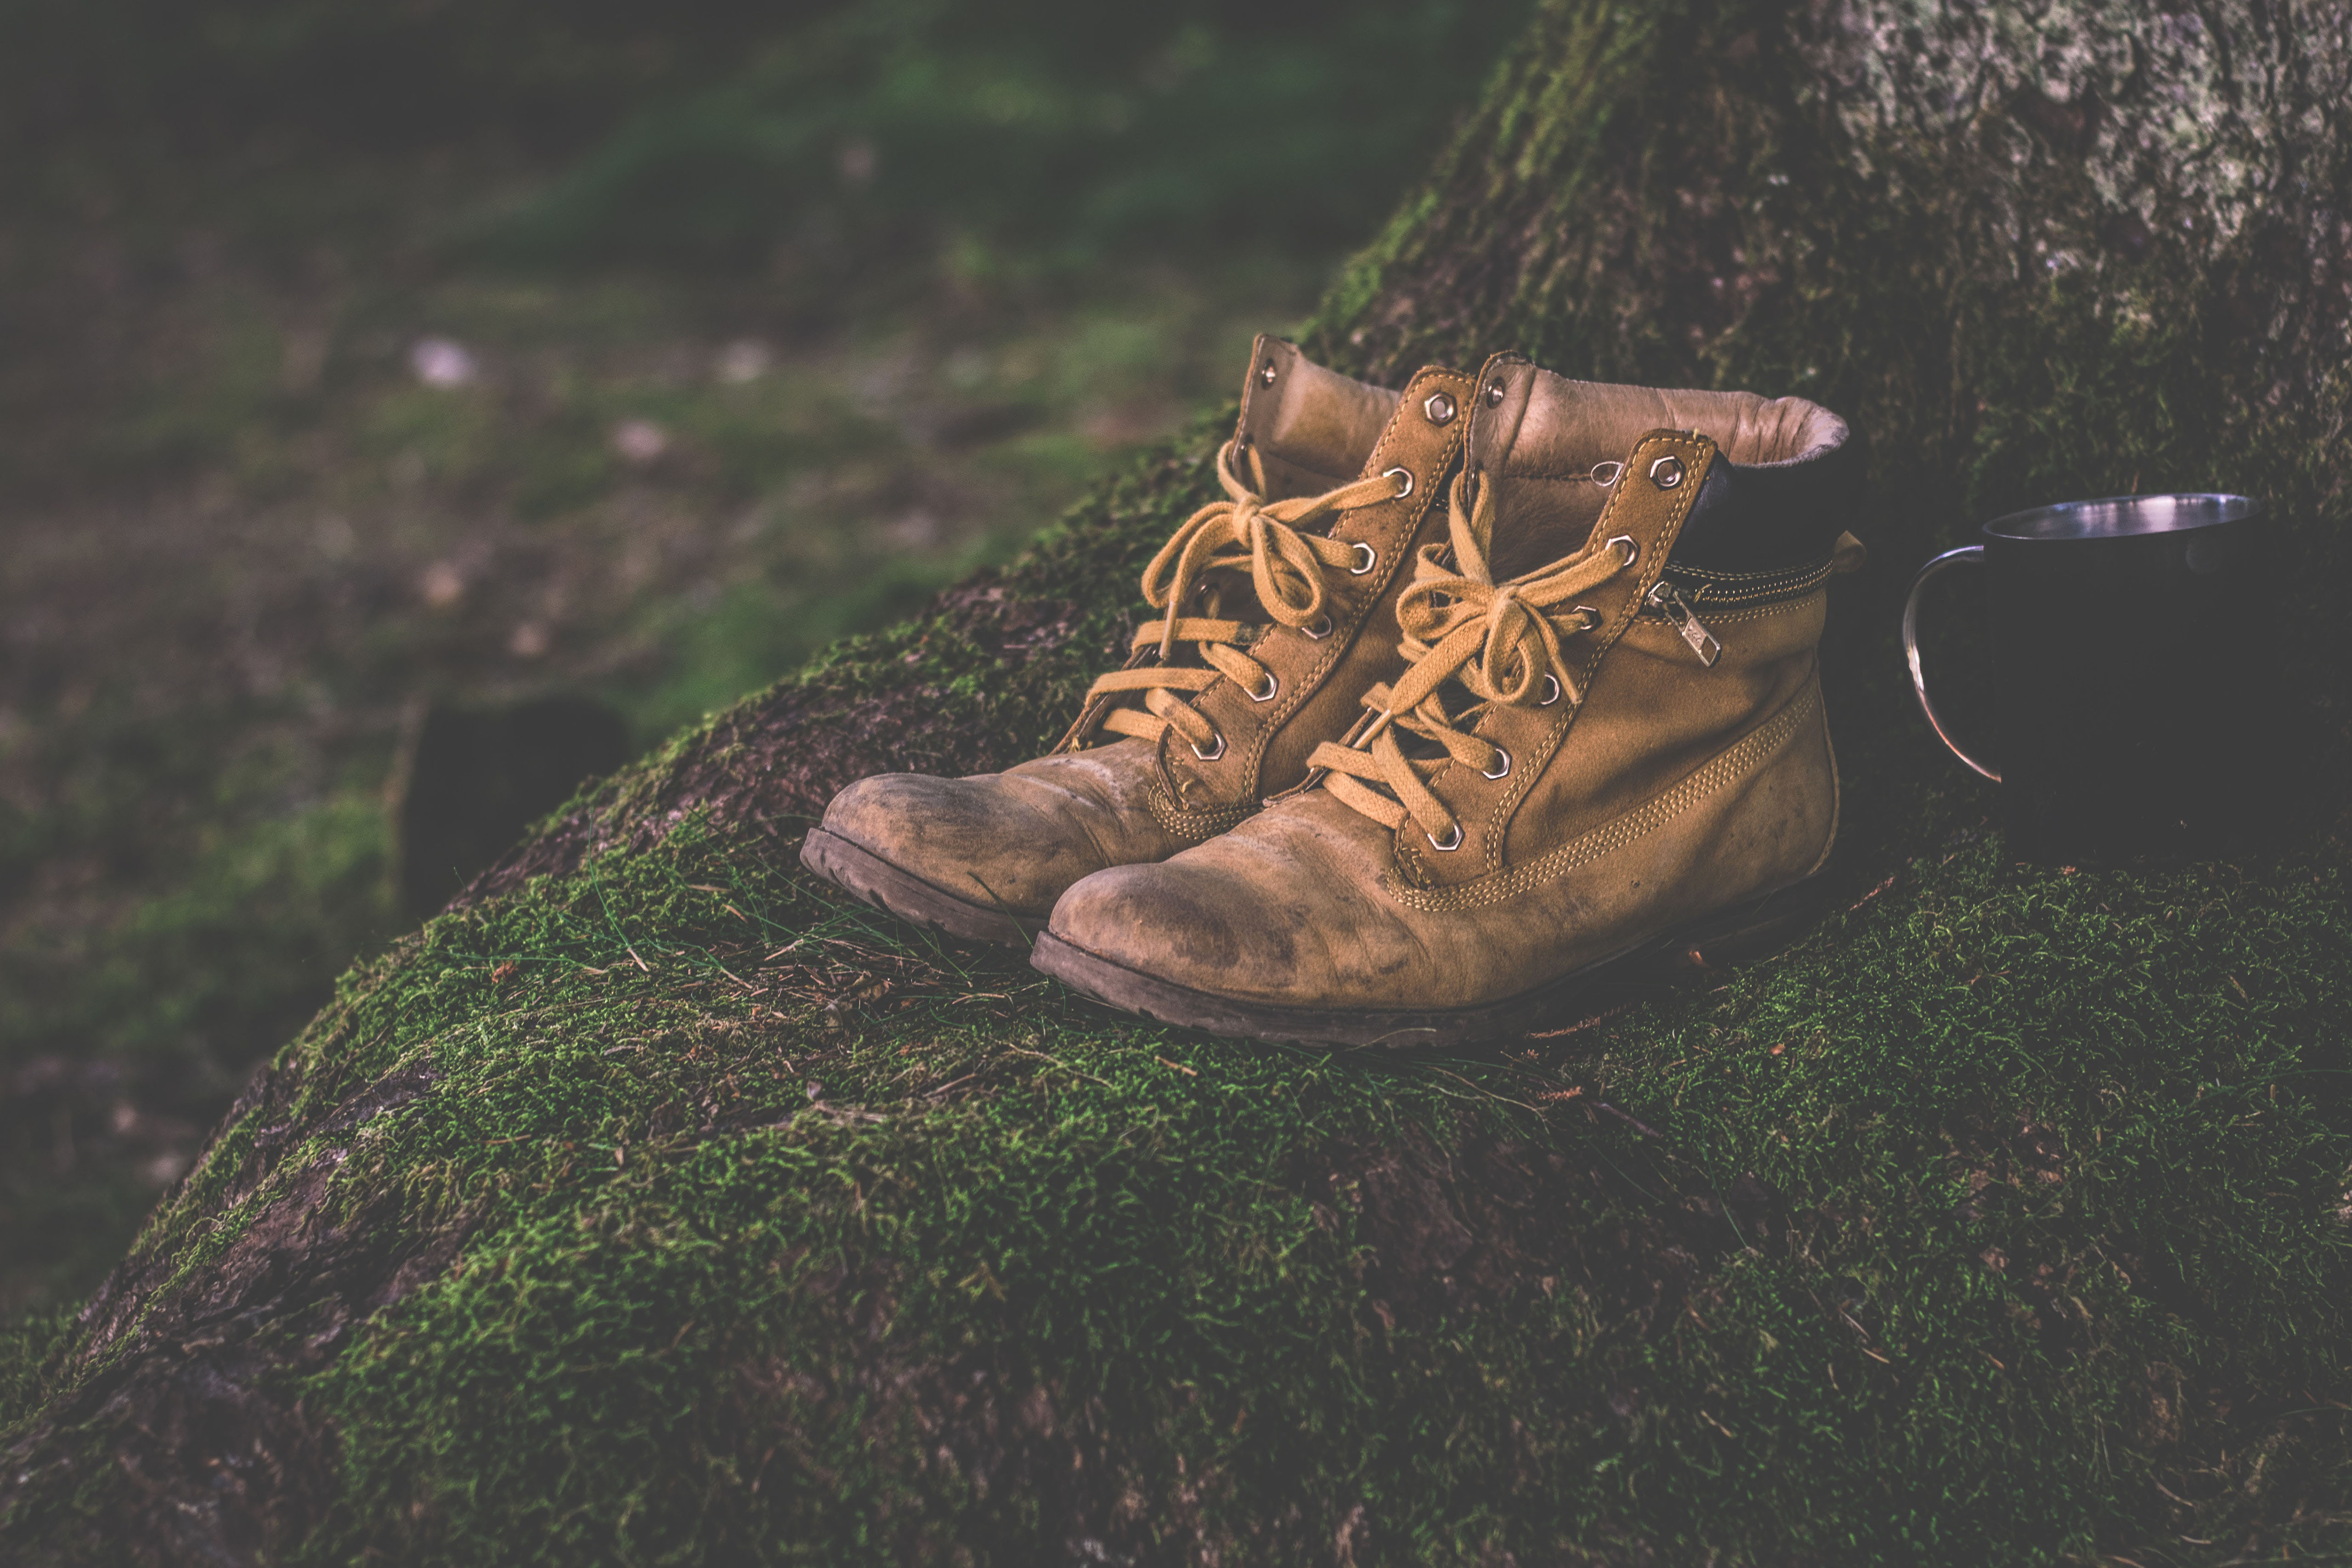 A properly broken-in pair of boots will become long-time companions at work, on the trail, and beyond.